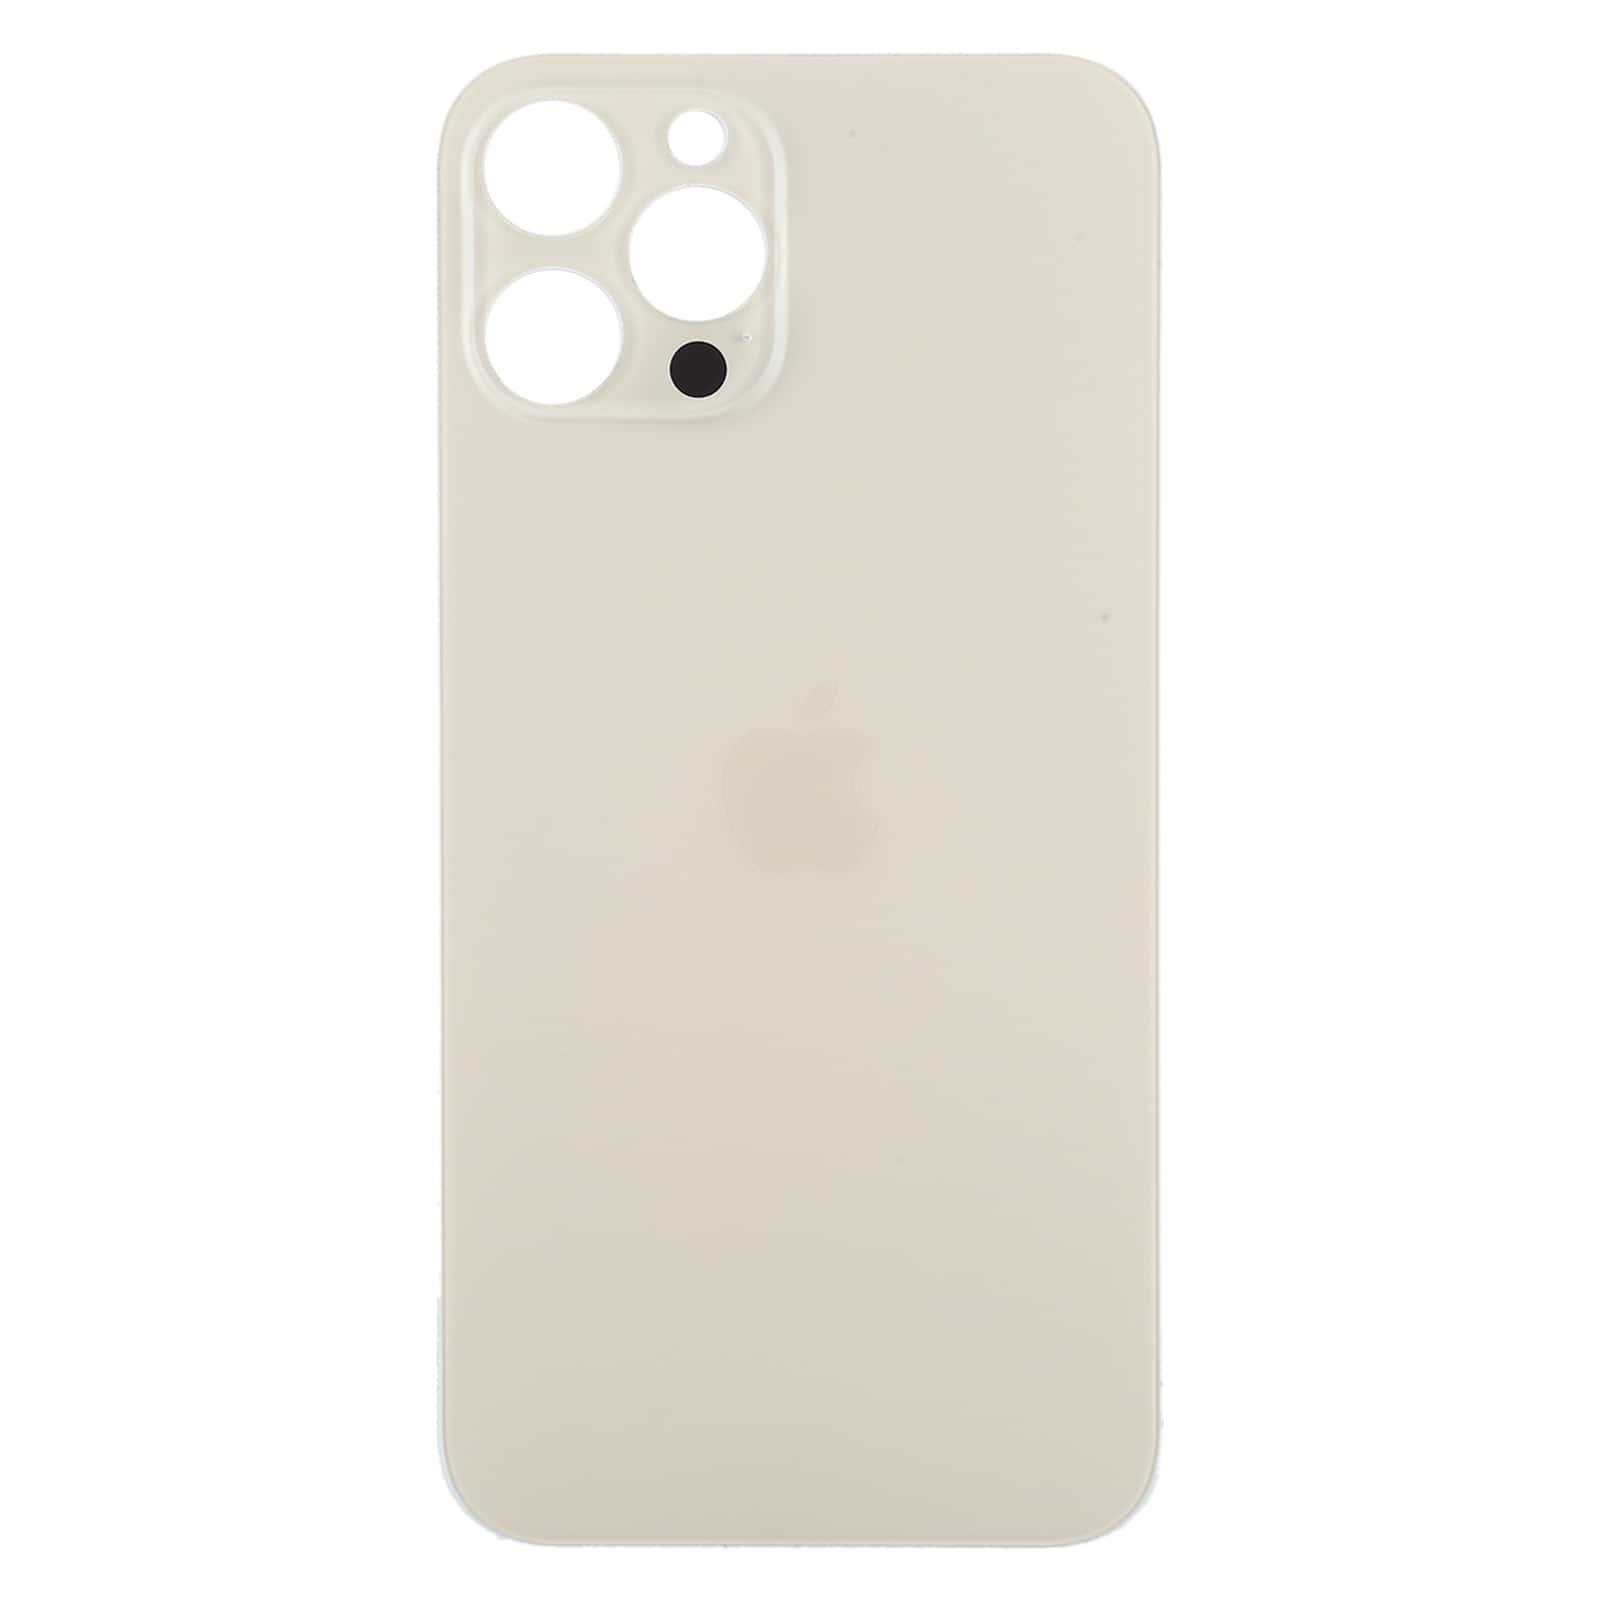 Back Glass Panel for iPhone 12 Pro Max Gold Big Camera Hole